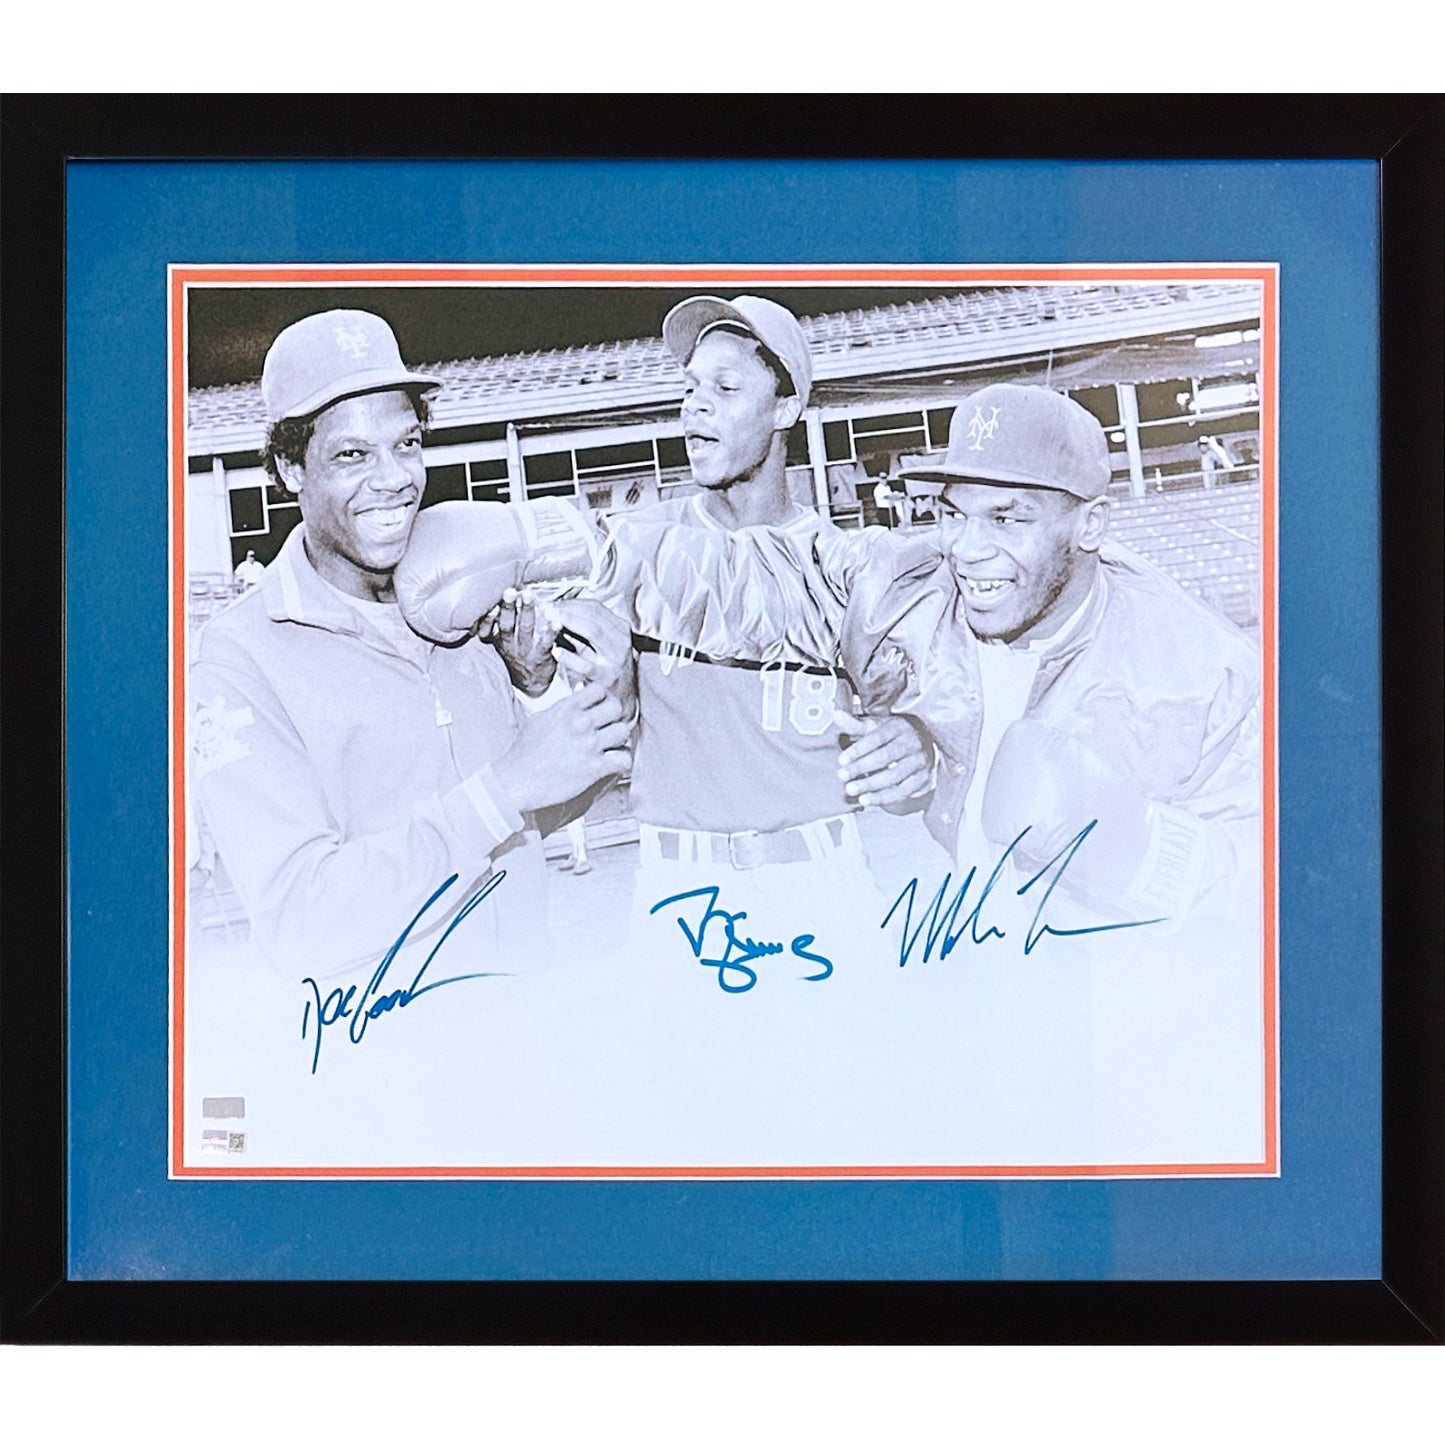 Dwight Gooden, Darryl Strawberry And Mike Tyson Autographed New York Mets (Fighting) Deluxe Framed 16x20 Photo